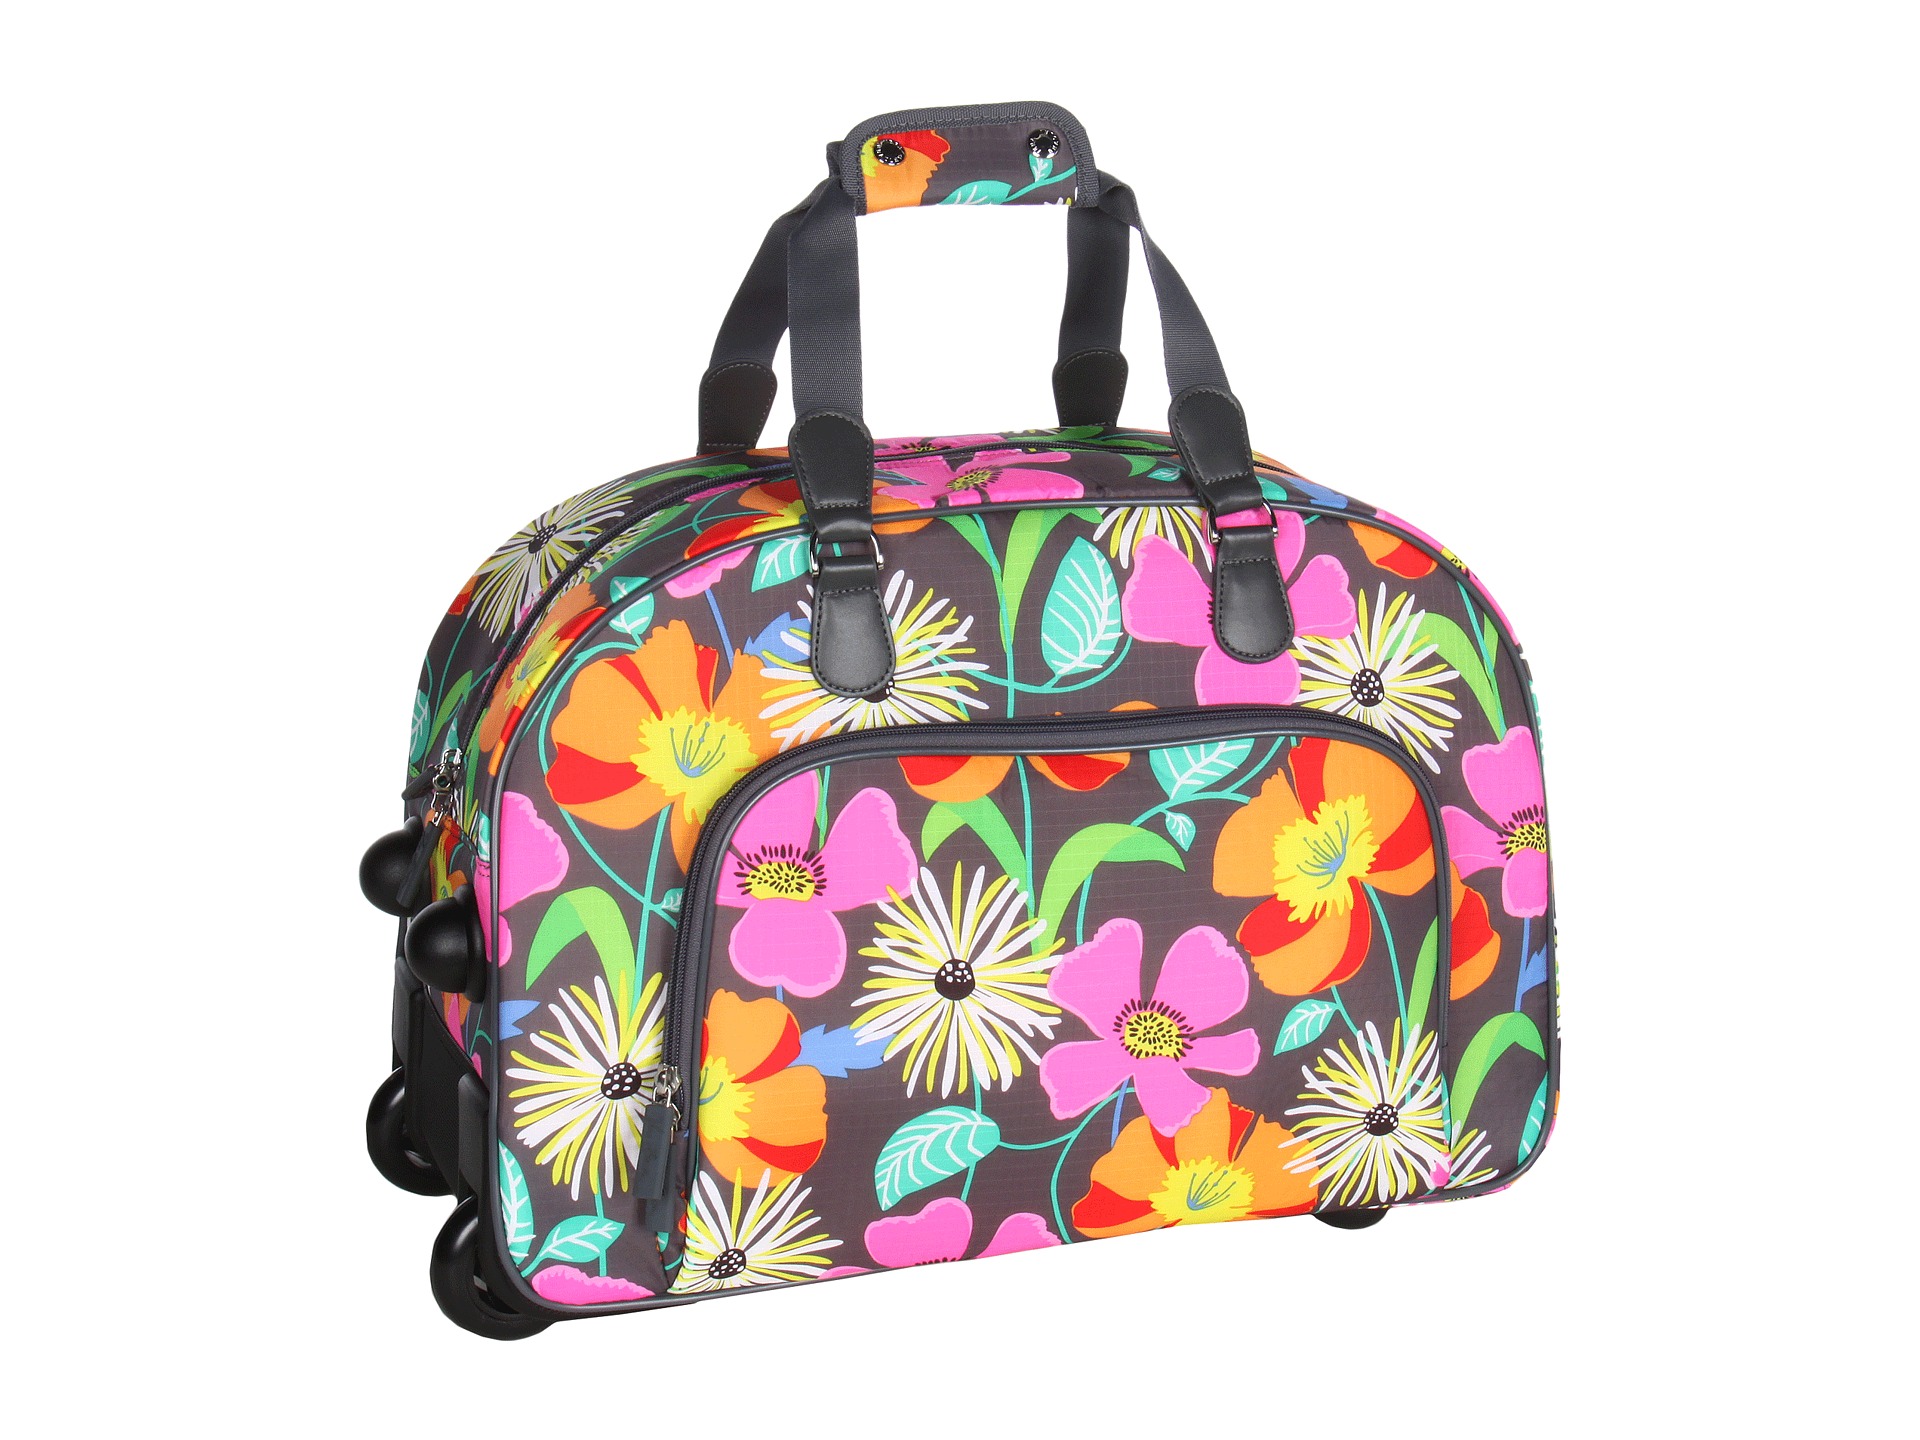 Vera bradley carry on luggage with wheels